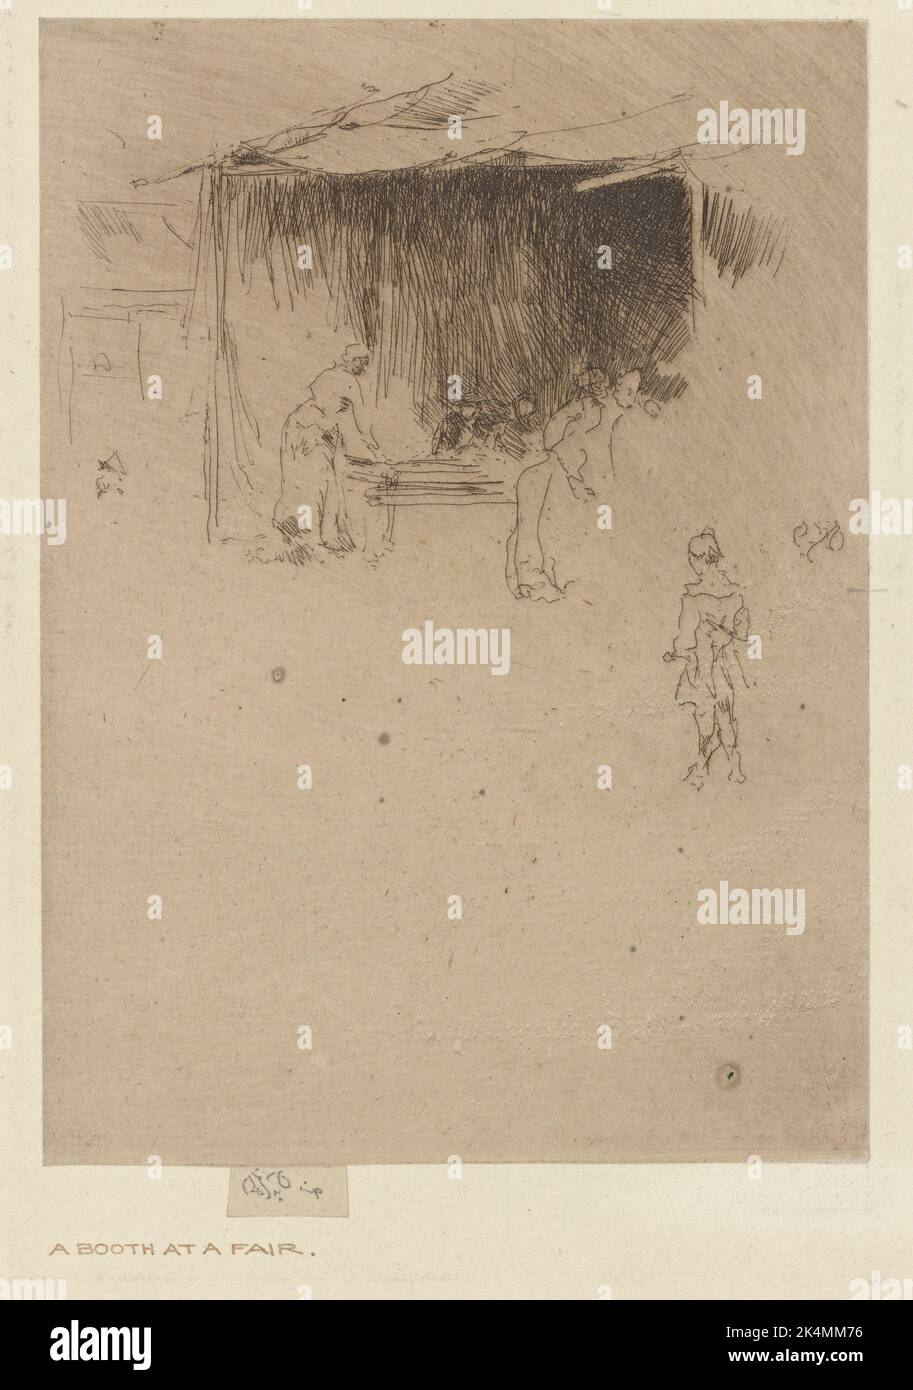 Whistler etching 246. Avery, Samuel Putnam, 1822-1904 (Collector) Whistler, James McNeill (1834-1903) (Artist). Samuel Putnam Avery Collection James Stock Photo